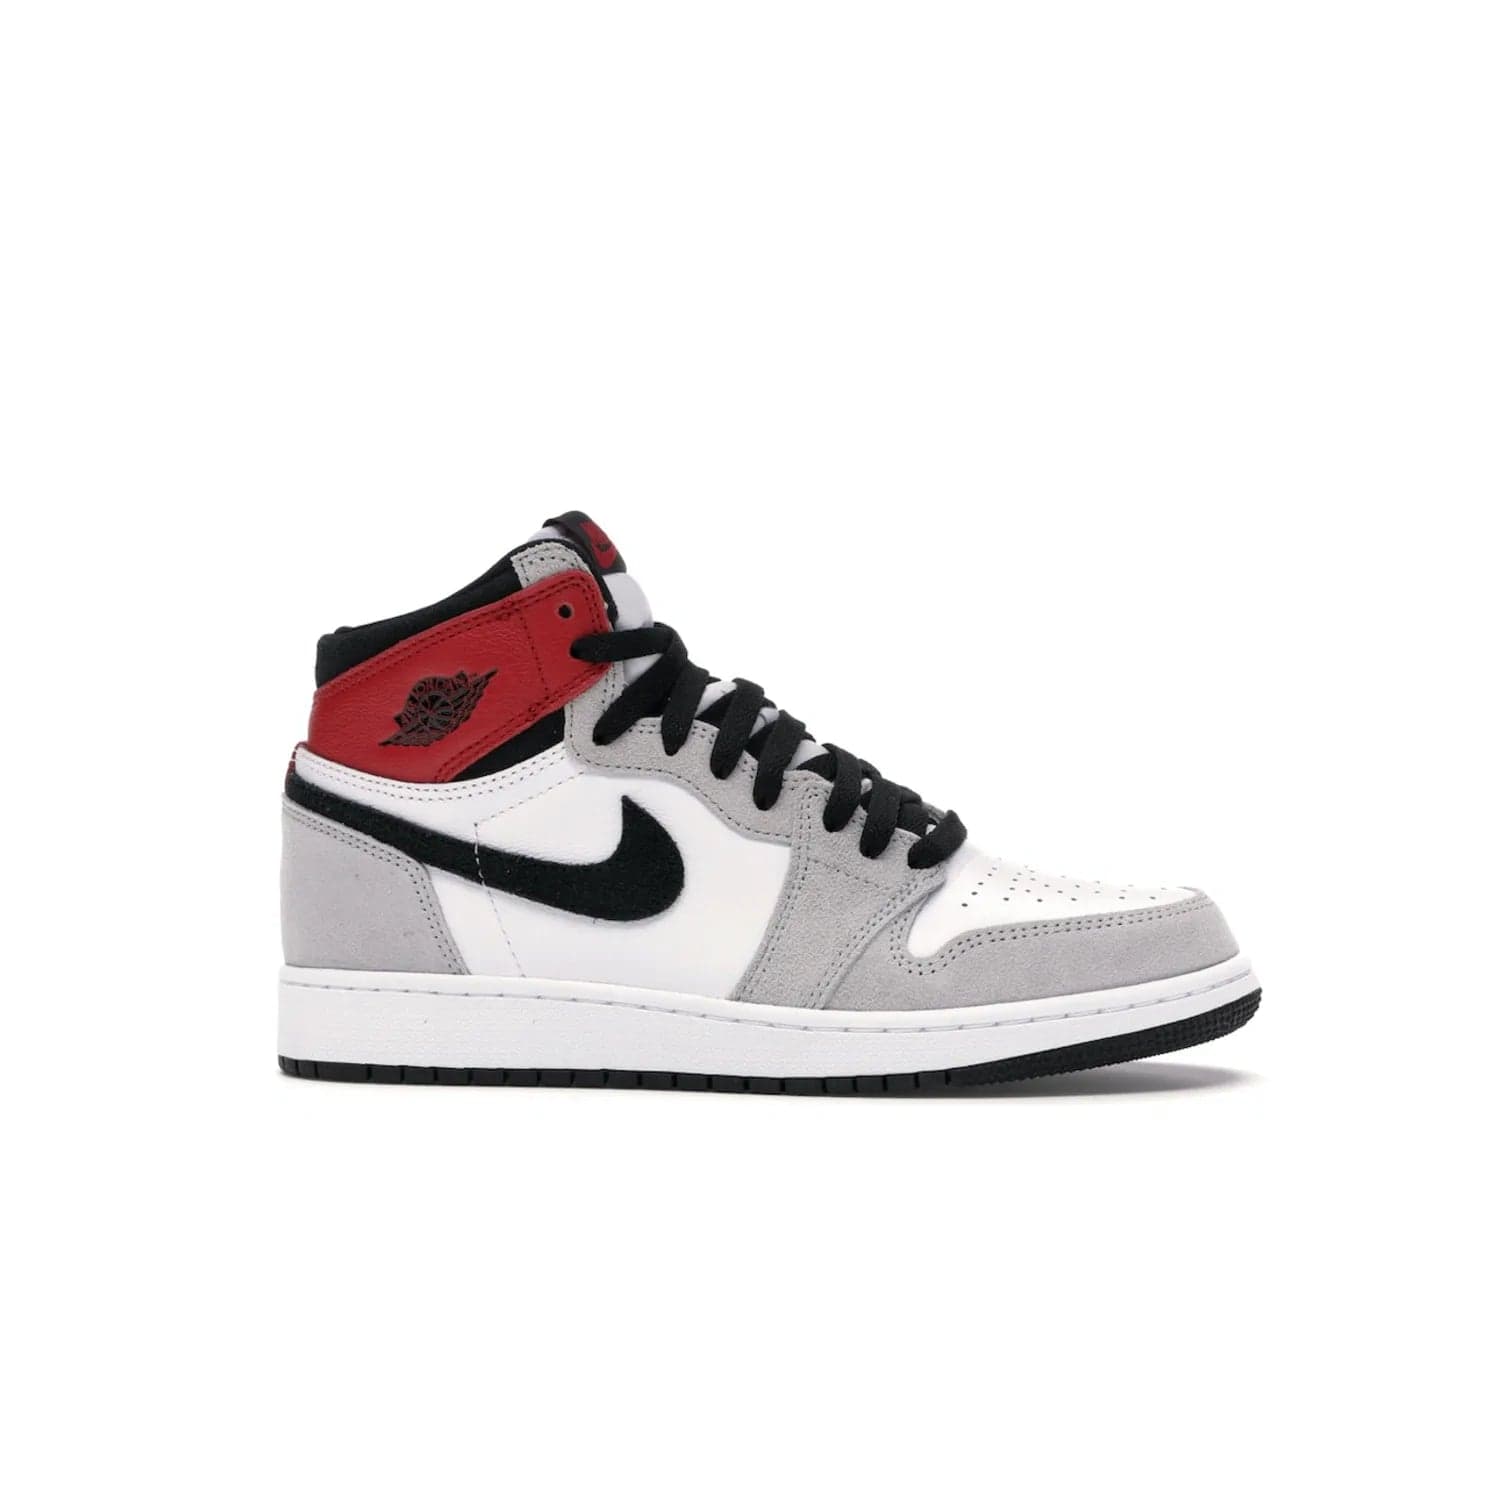 Jordan 1 Retro High Light Smoke Grey (GS) - Image 2 - Only at www.BallersClubKickz.com - Jordan 1 Retro High Light Smoke Grey (GS) features shades of grey, black, and Varsity Red with a bold silhouette. Premium white leather and suede overlays create a unique look. Released July 2020, offering style and performance. Perfect sneaker for any collector or fan.